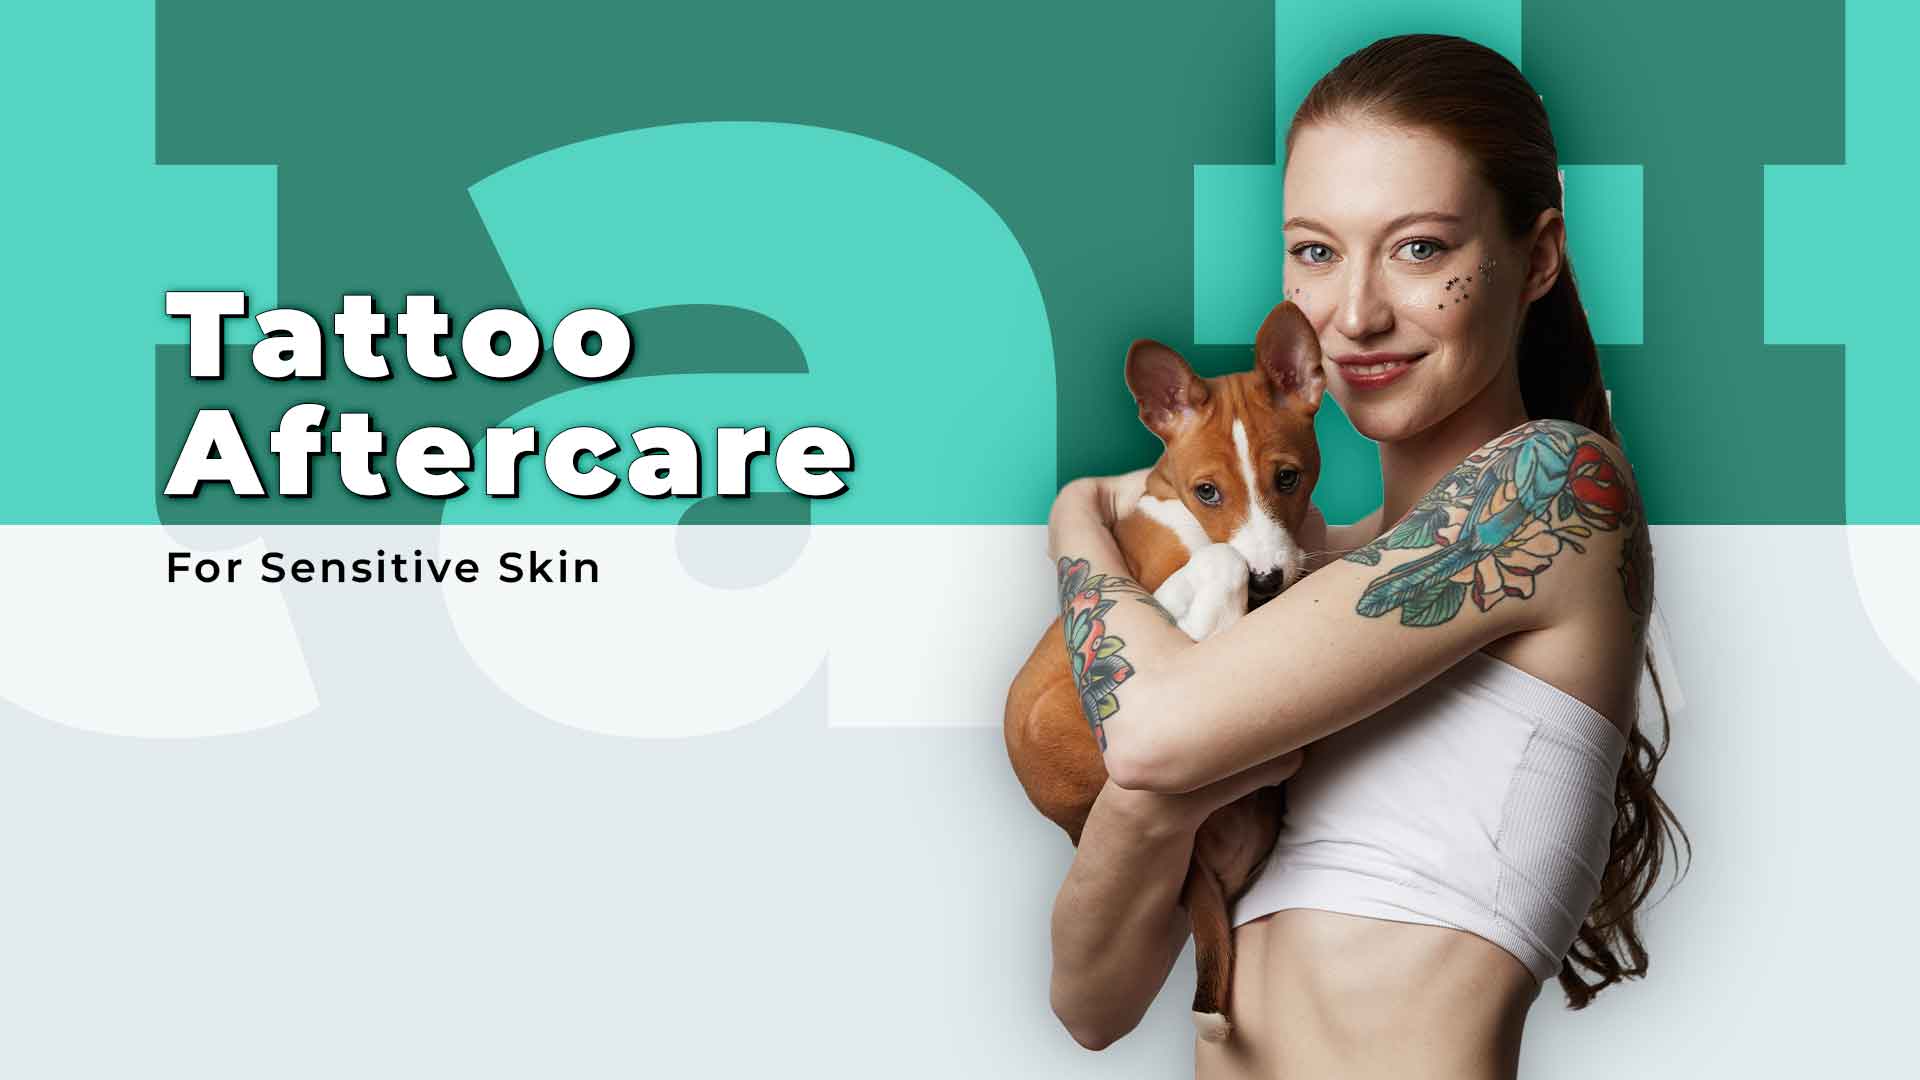 Tattoo Aftercare For Sensitive Skin